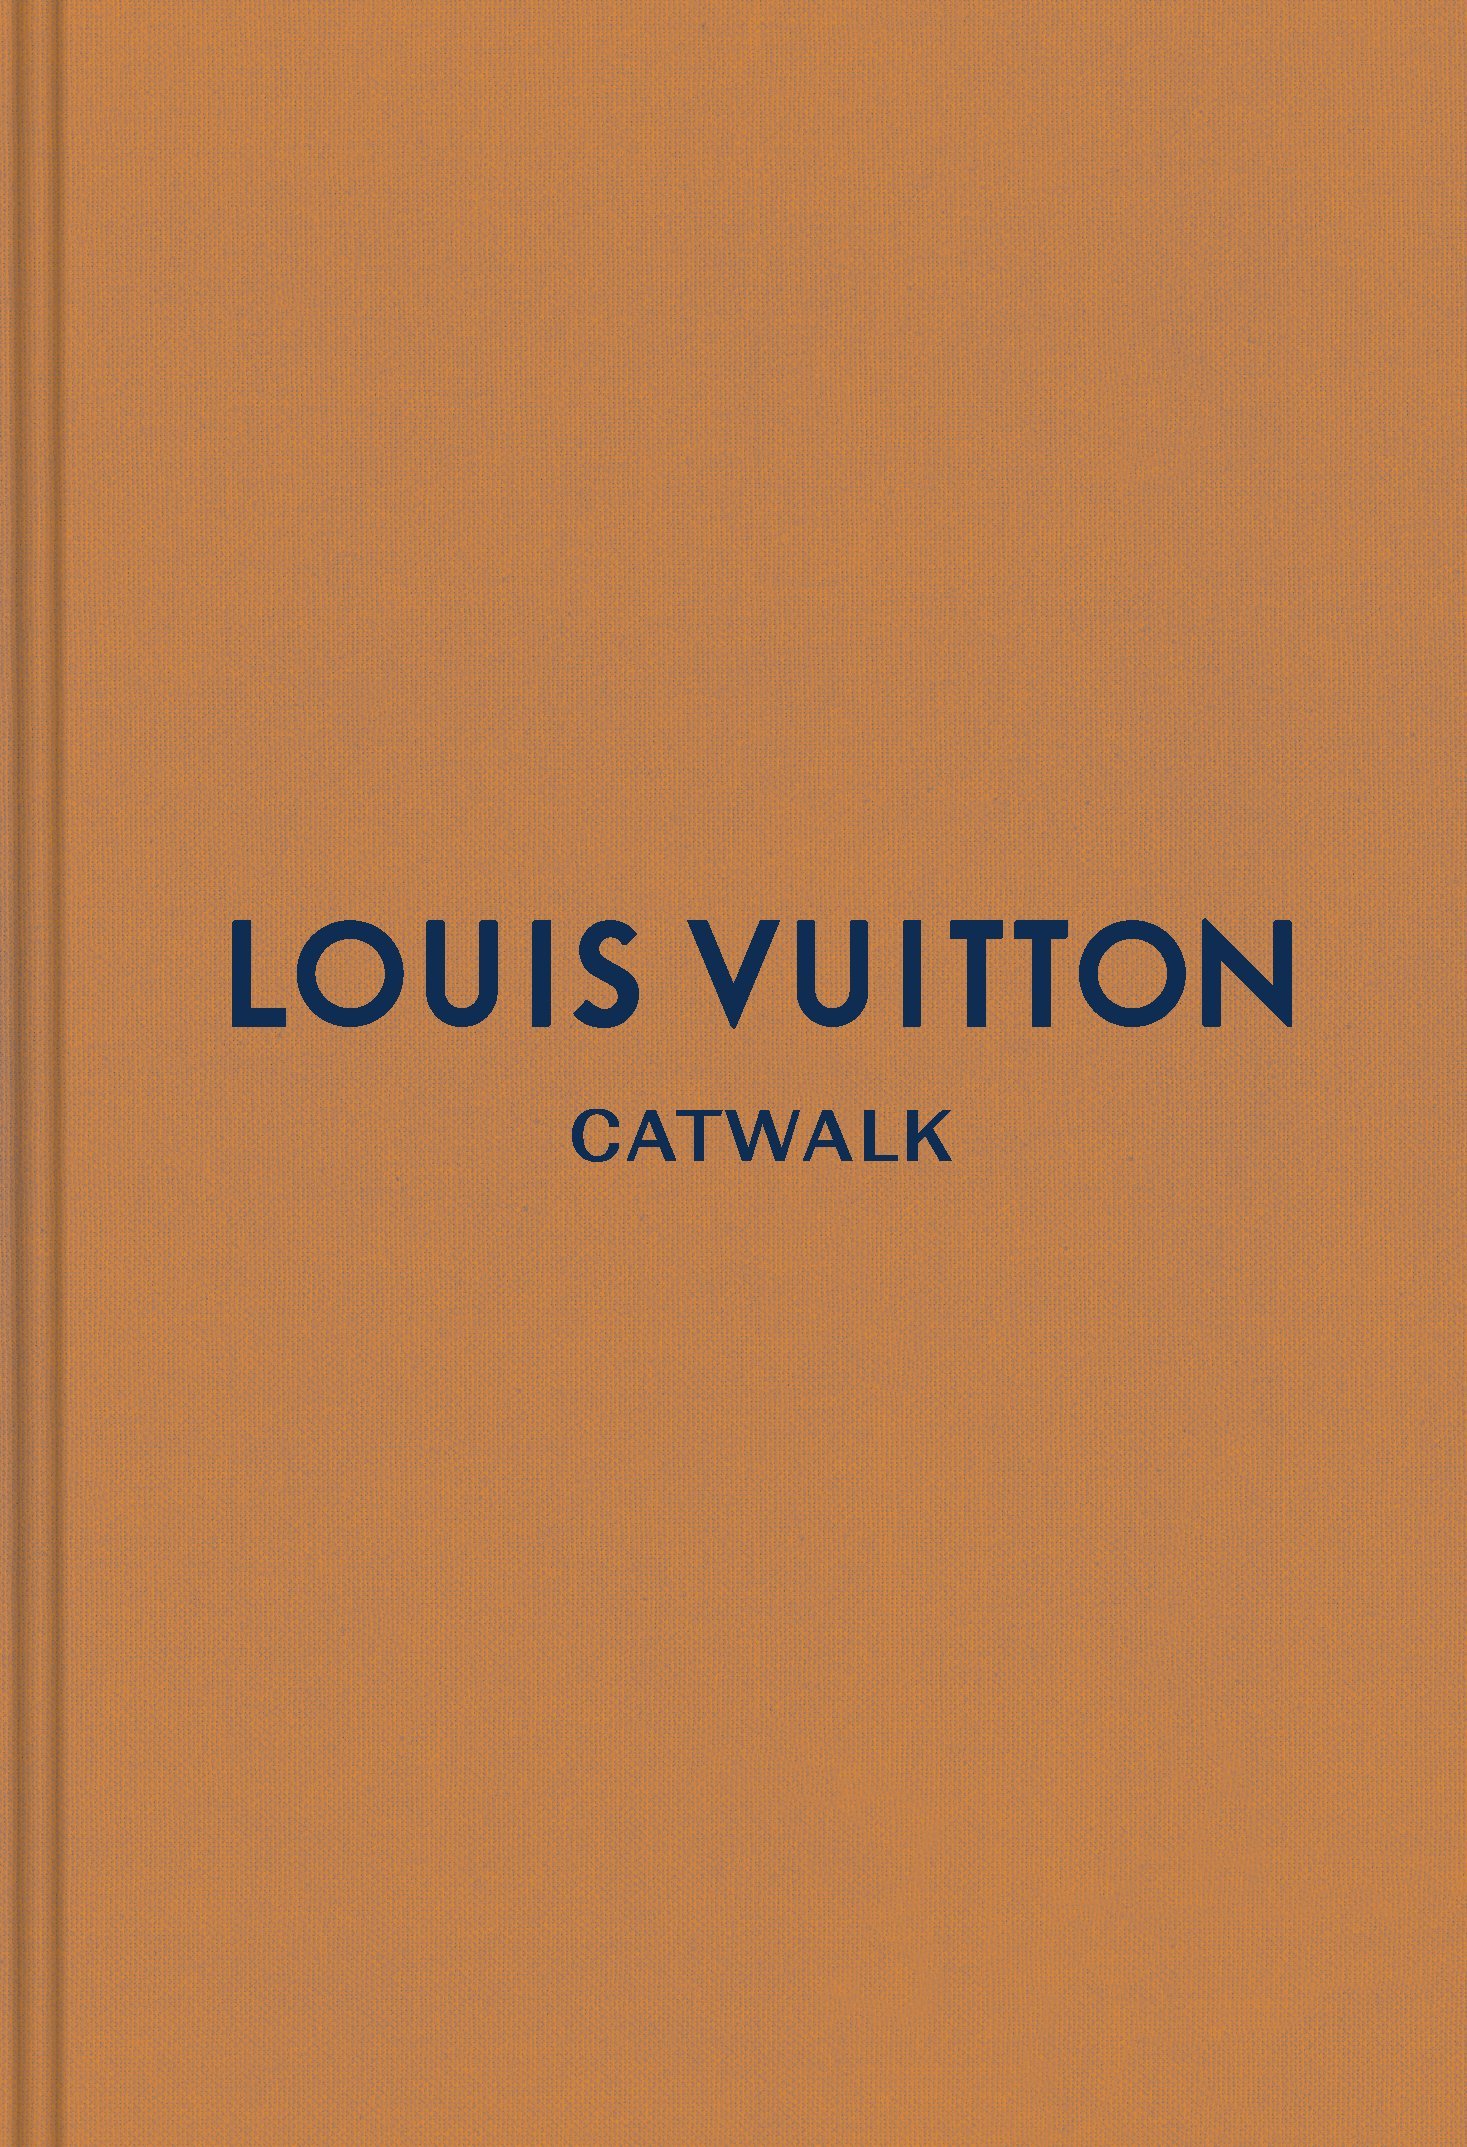 Louis Vuitton Manufactures by Nicholas Foulkes  Coffee Table Book   ASSOULINE